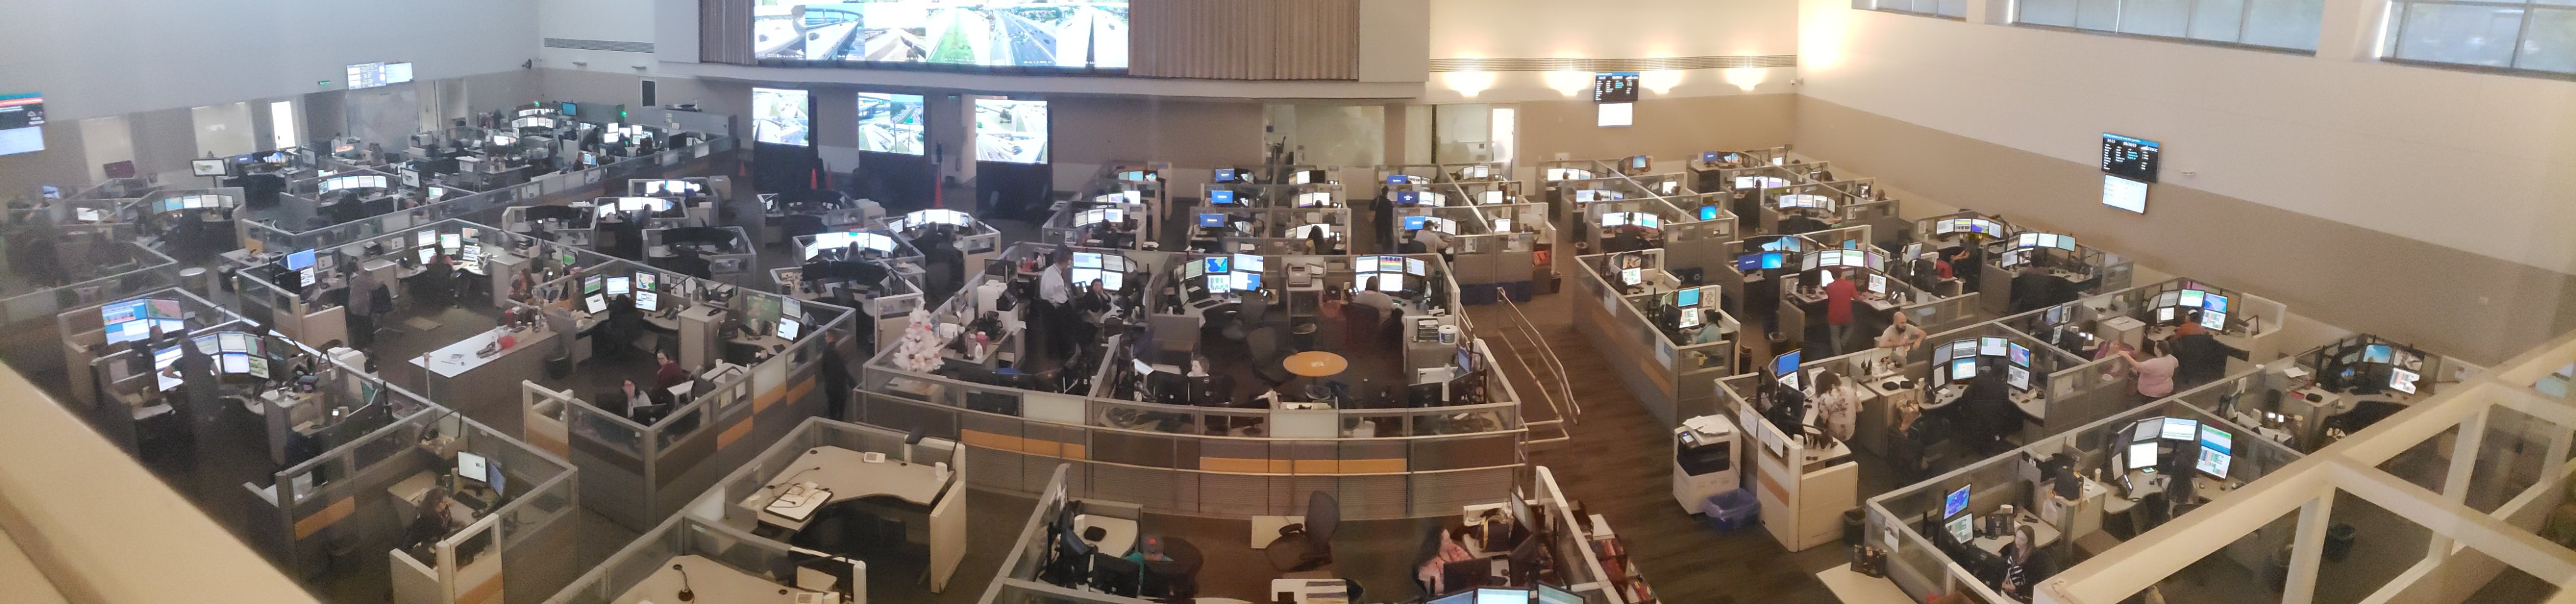 Emergency Call Center staff working in front of multiple TV monitors